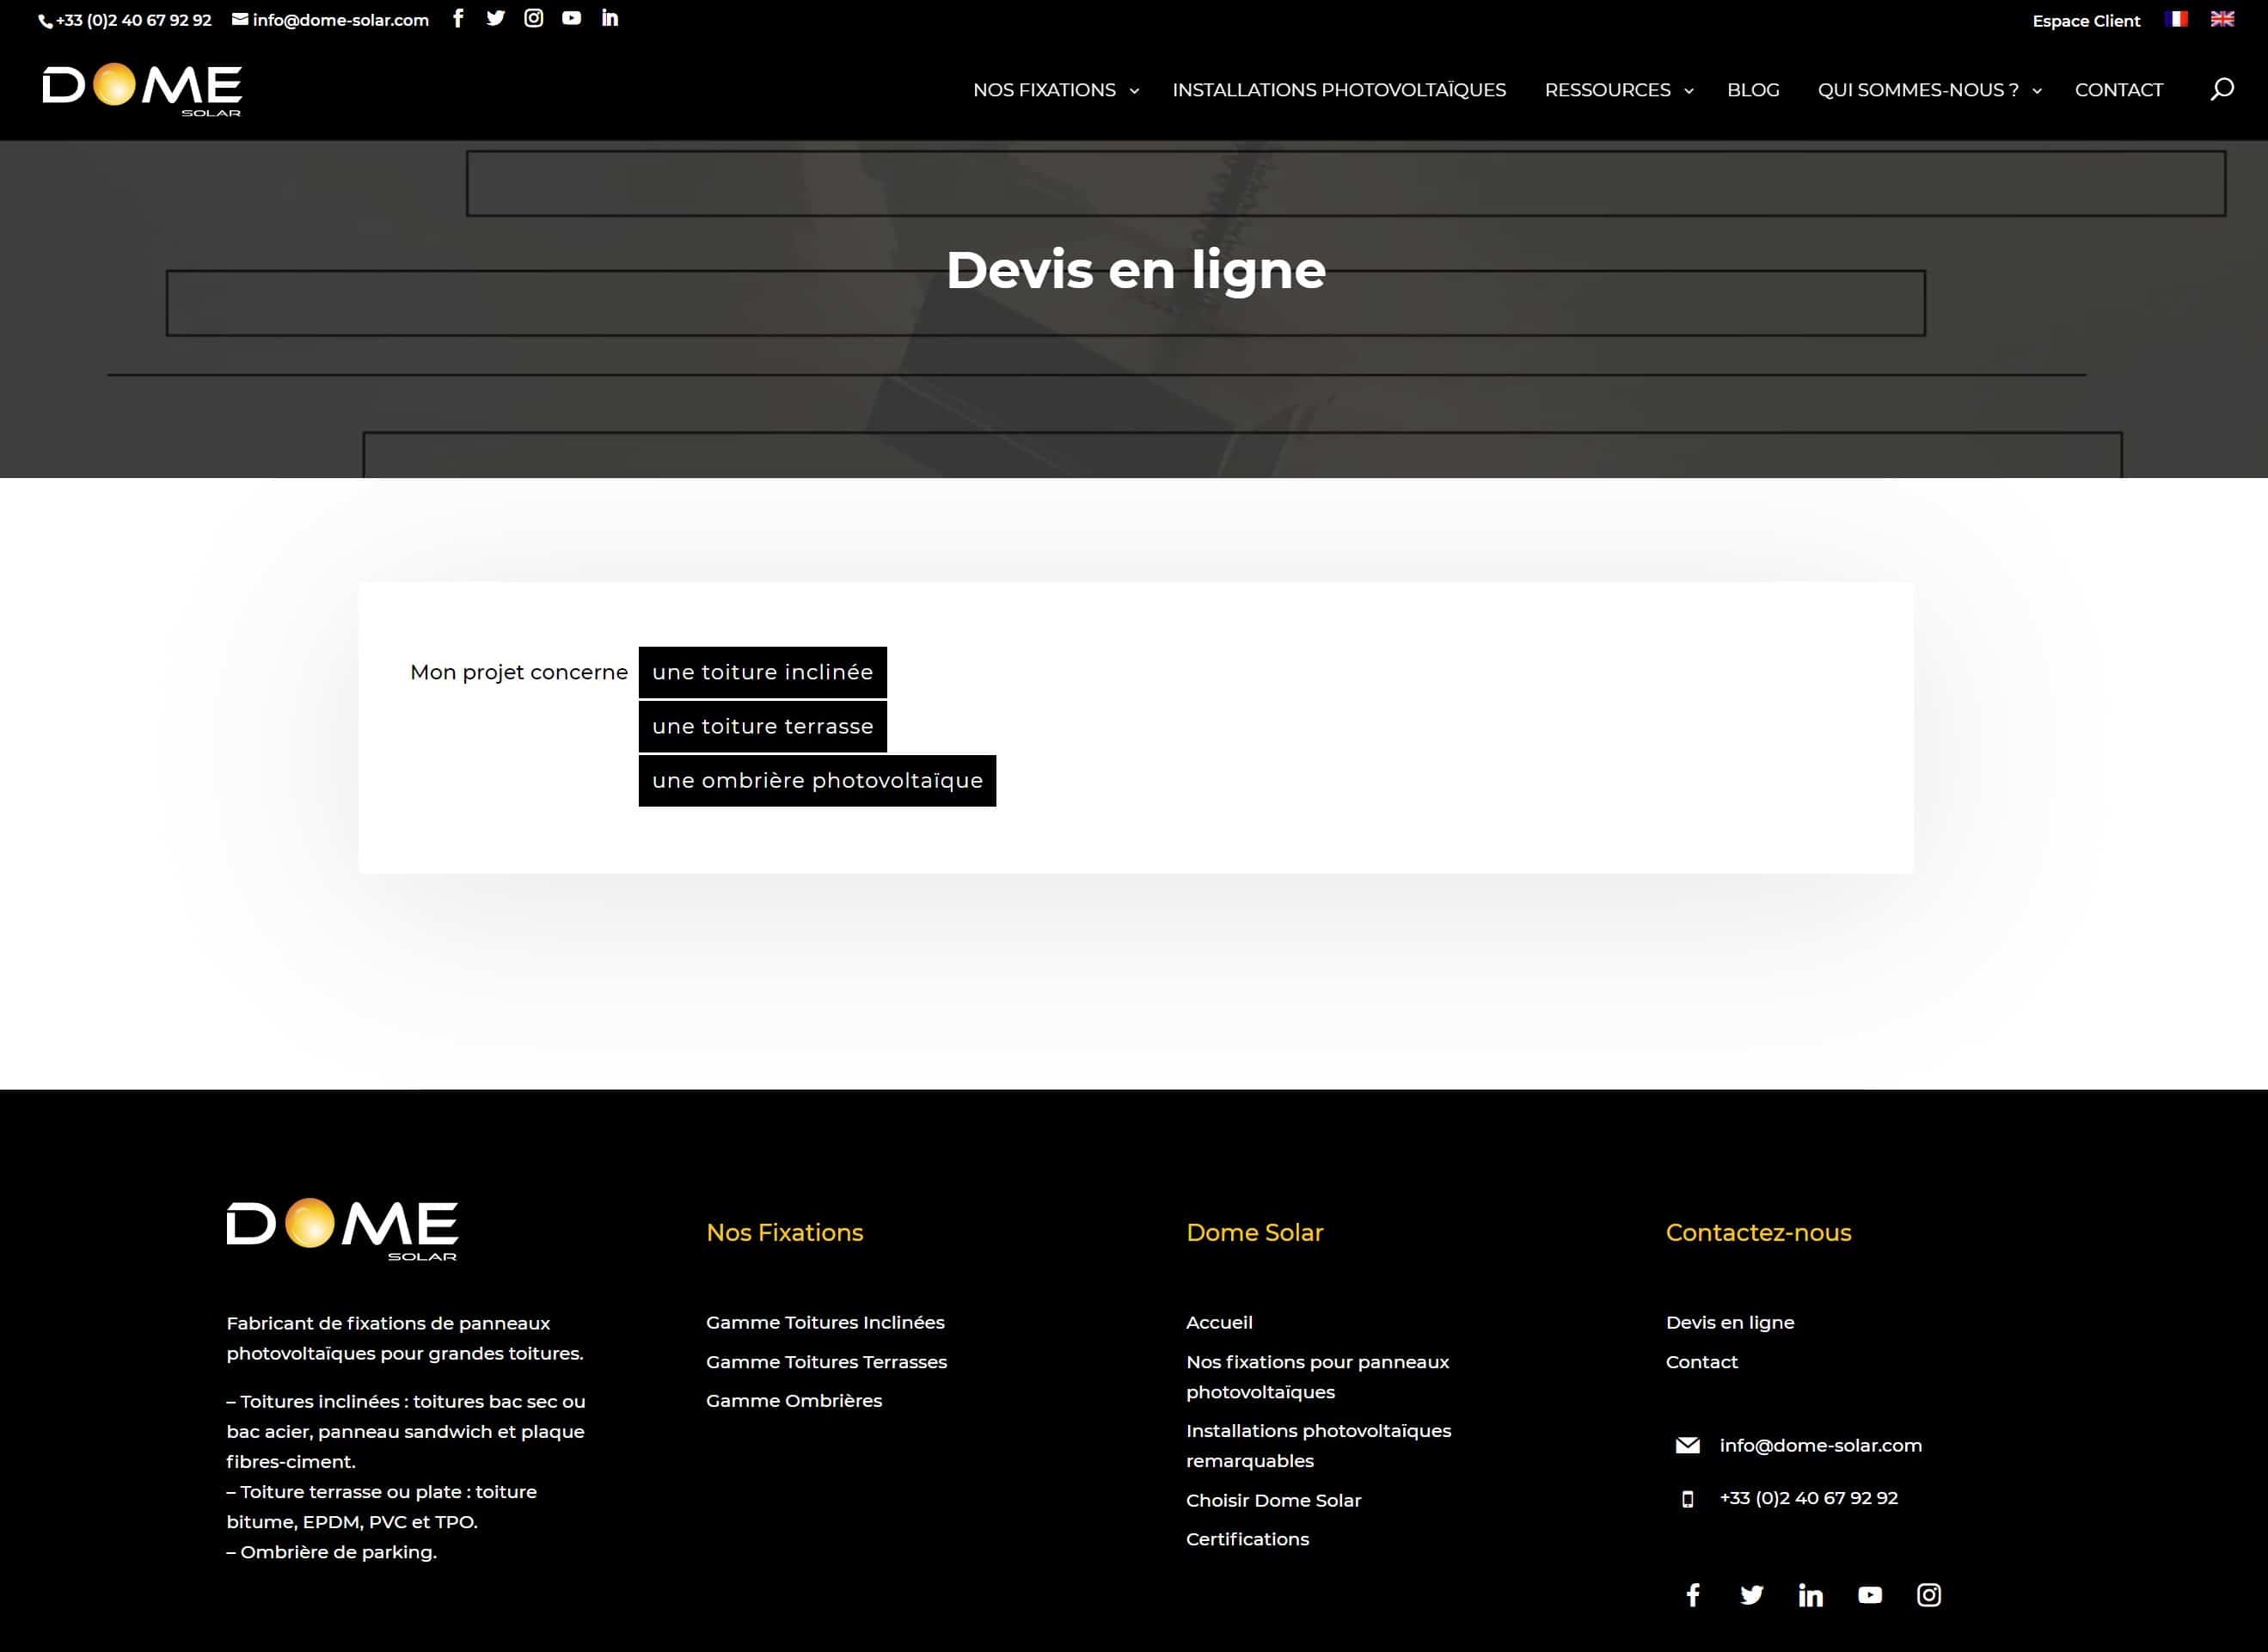 Dome Solar improves the functionality of its website